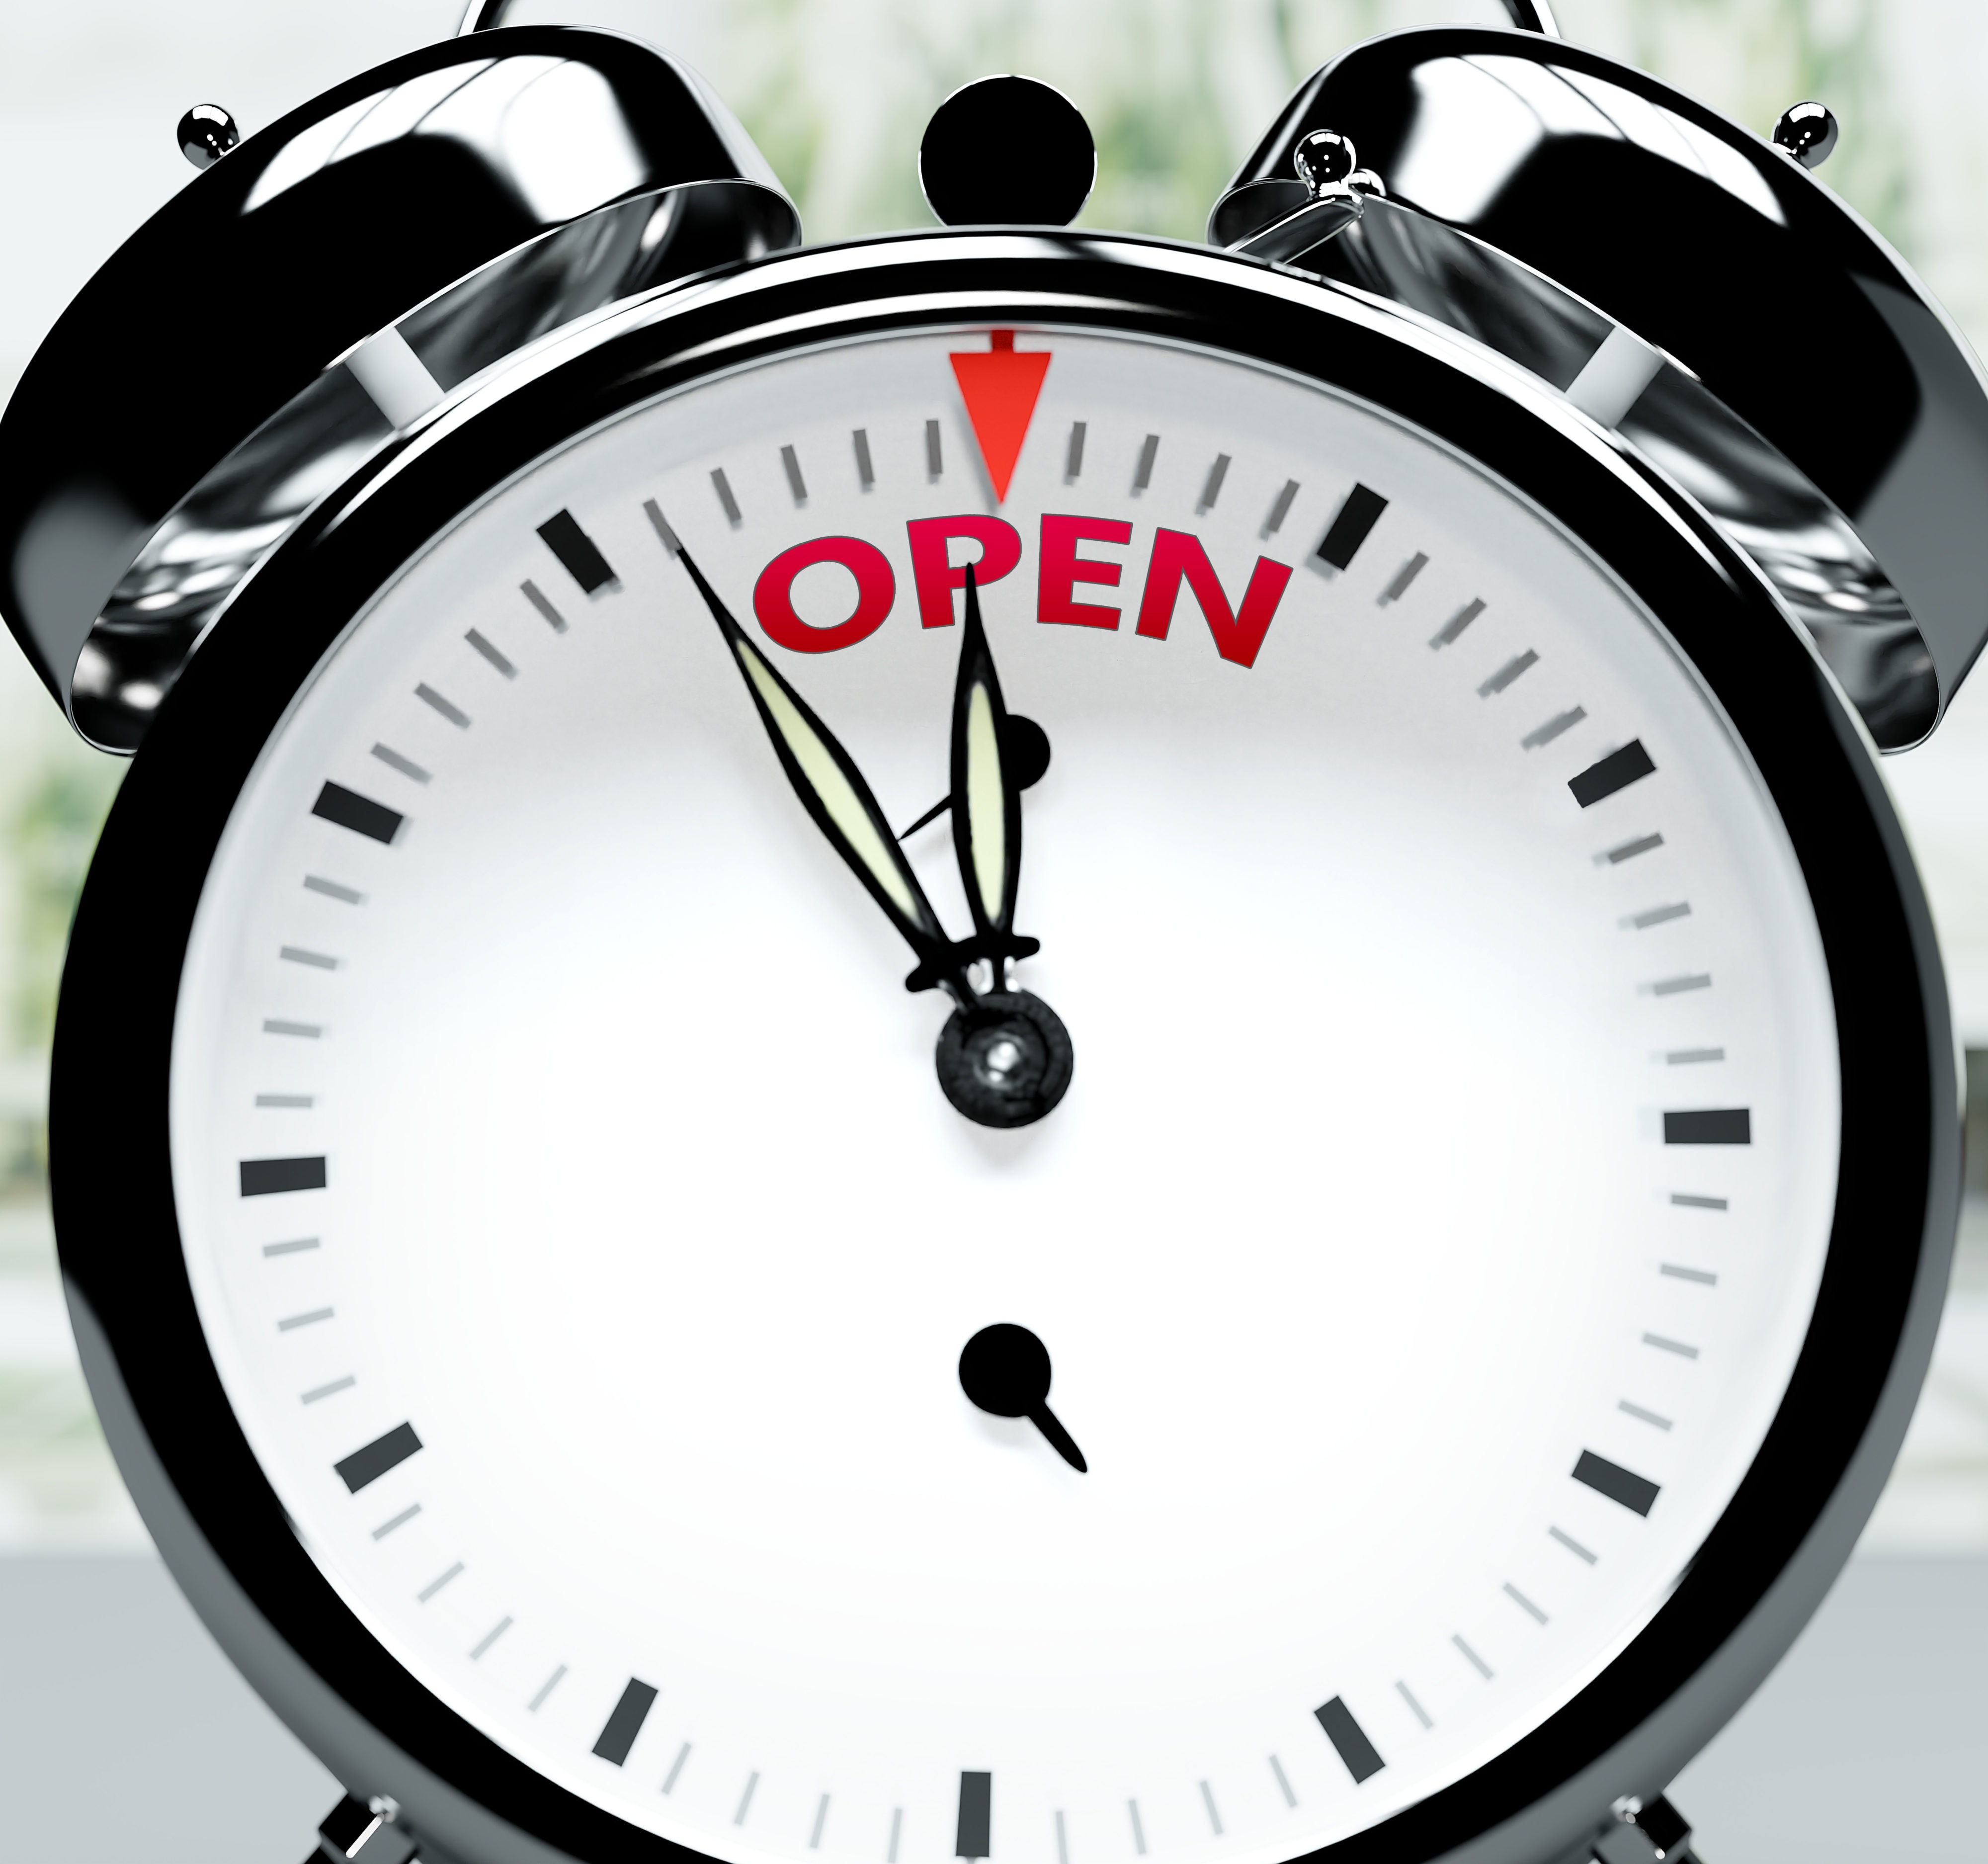 Open soon, almost there, in short time - a clock symbolizes a reminder that Open is near, will happen and finish quickly in a little while, 3d illustration